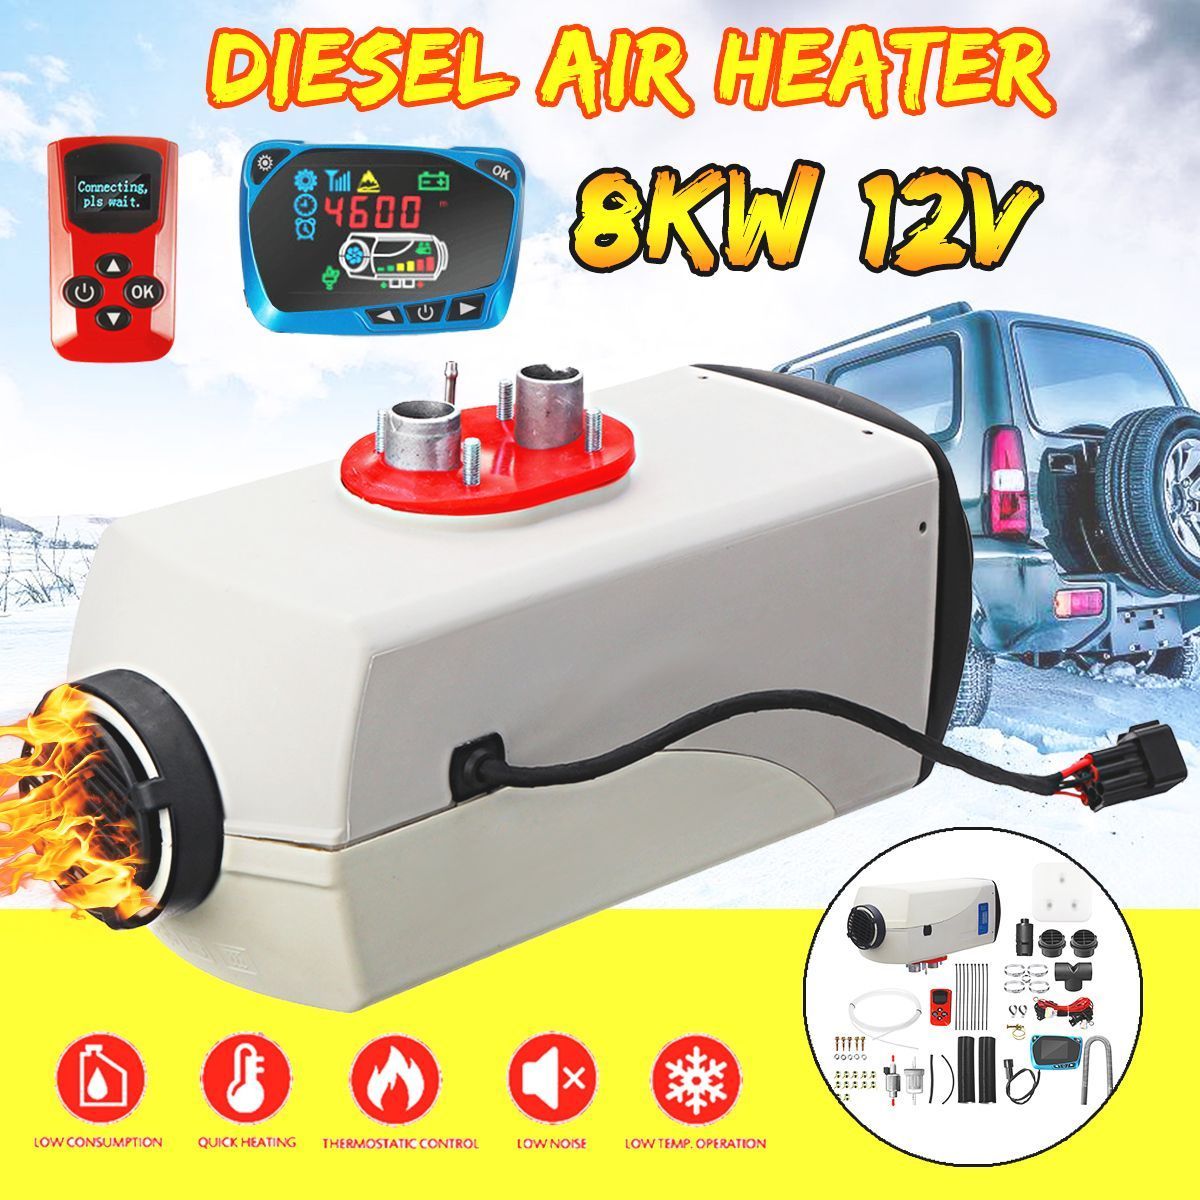 12V-8KW-Diesel-Air-Heater-LCD-Thermostat-For-Car-Truck-Boat-Trailer-Vehicles-Bus-1587806